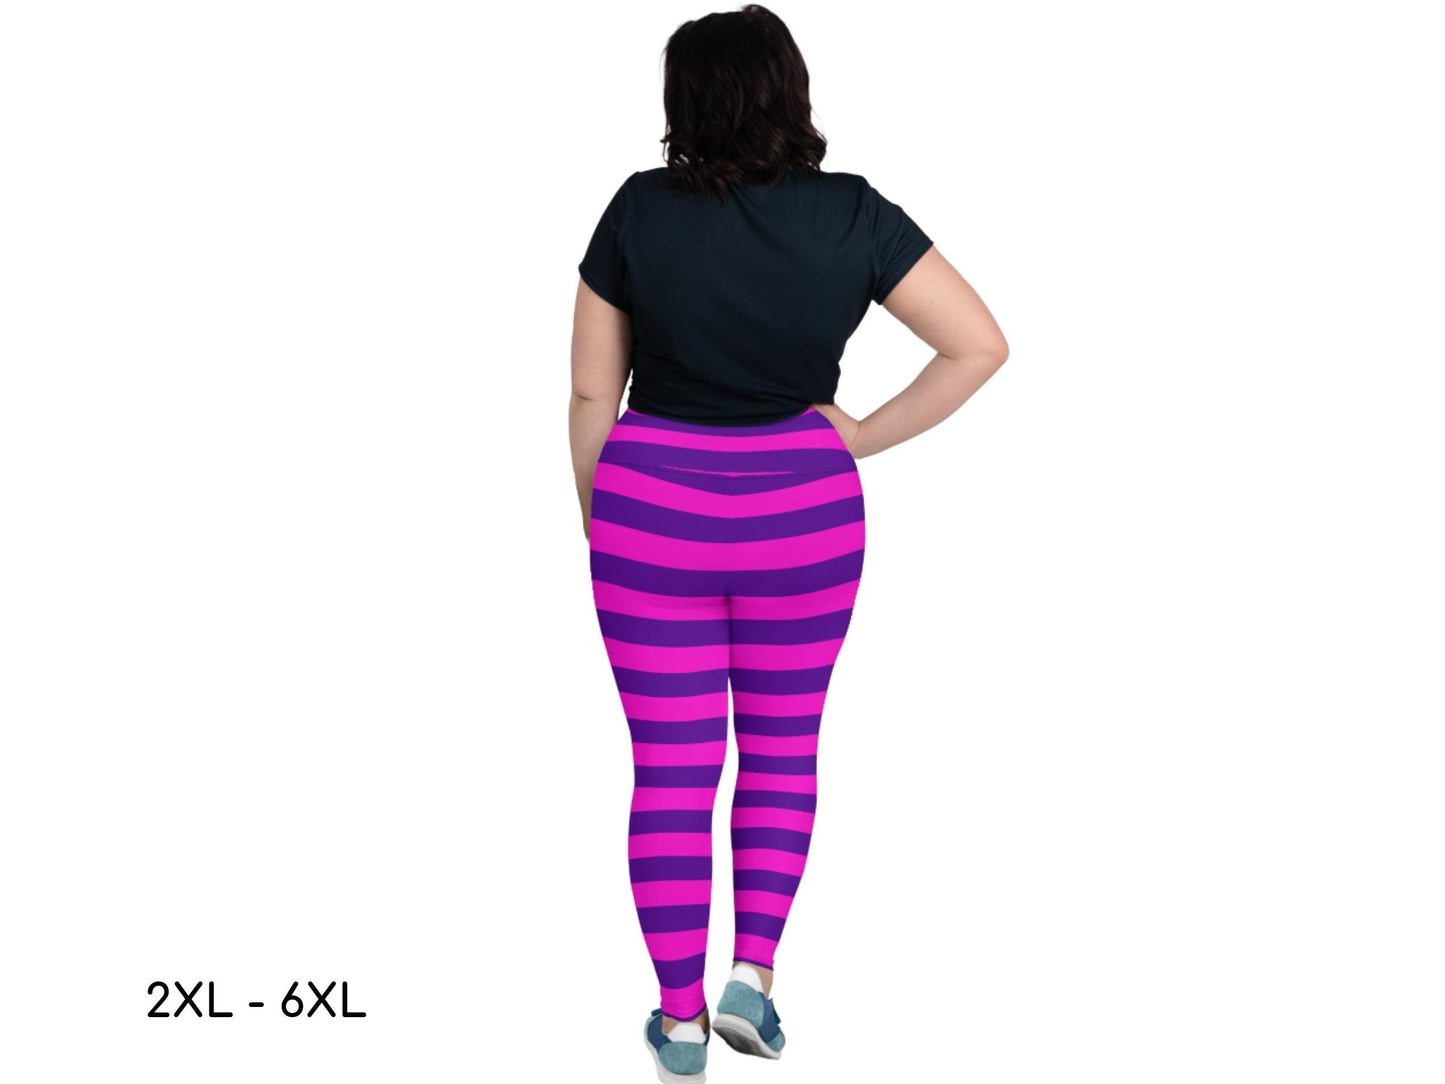 Cheshire Cat Inspired Plus Size Yoga Leggings, Alice in Wonderland, Mad HatterTea Party, Adult Halloween Costume, Sexy BBW, Gift for Her